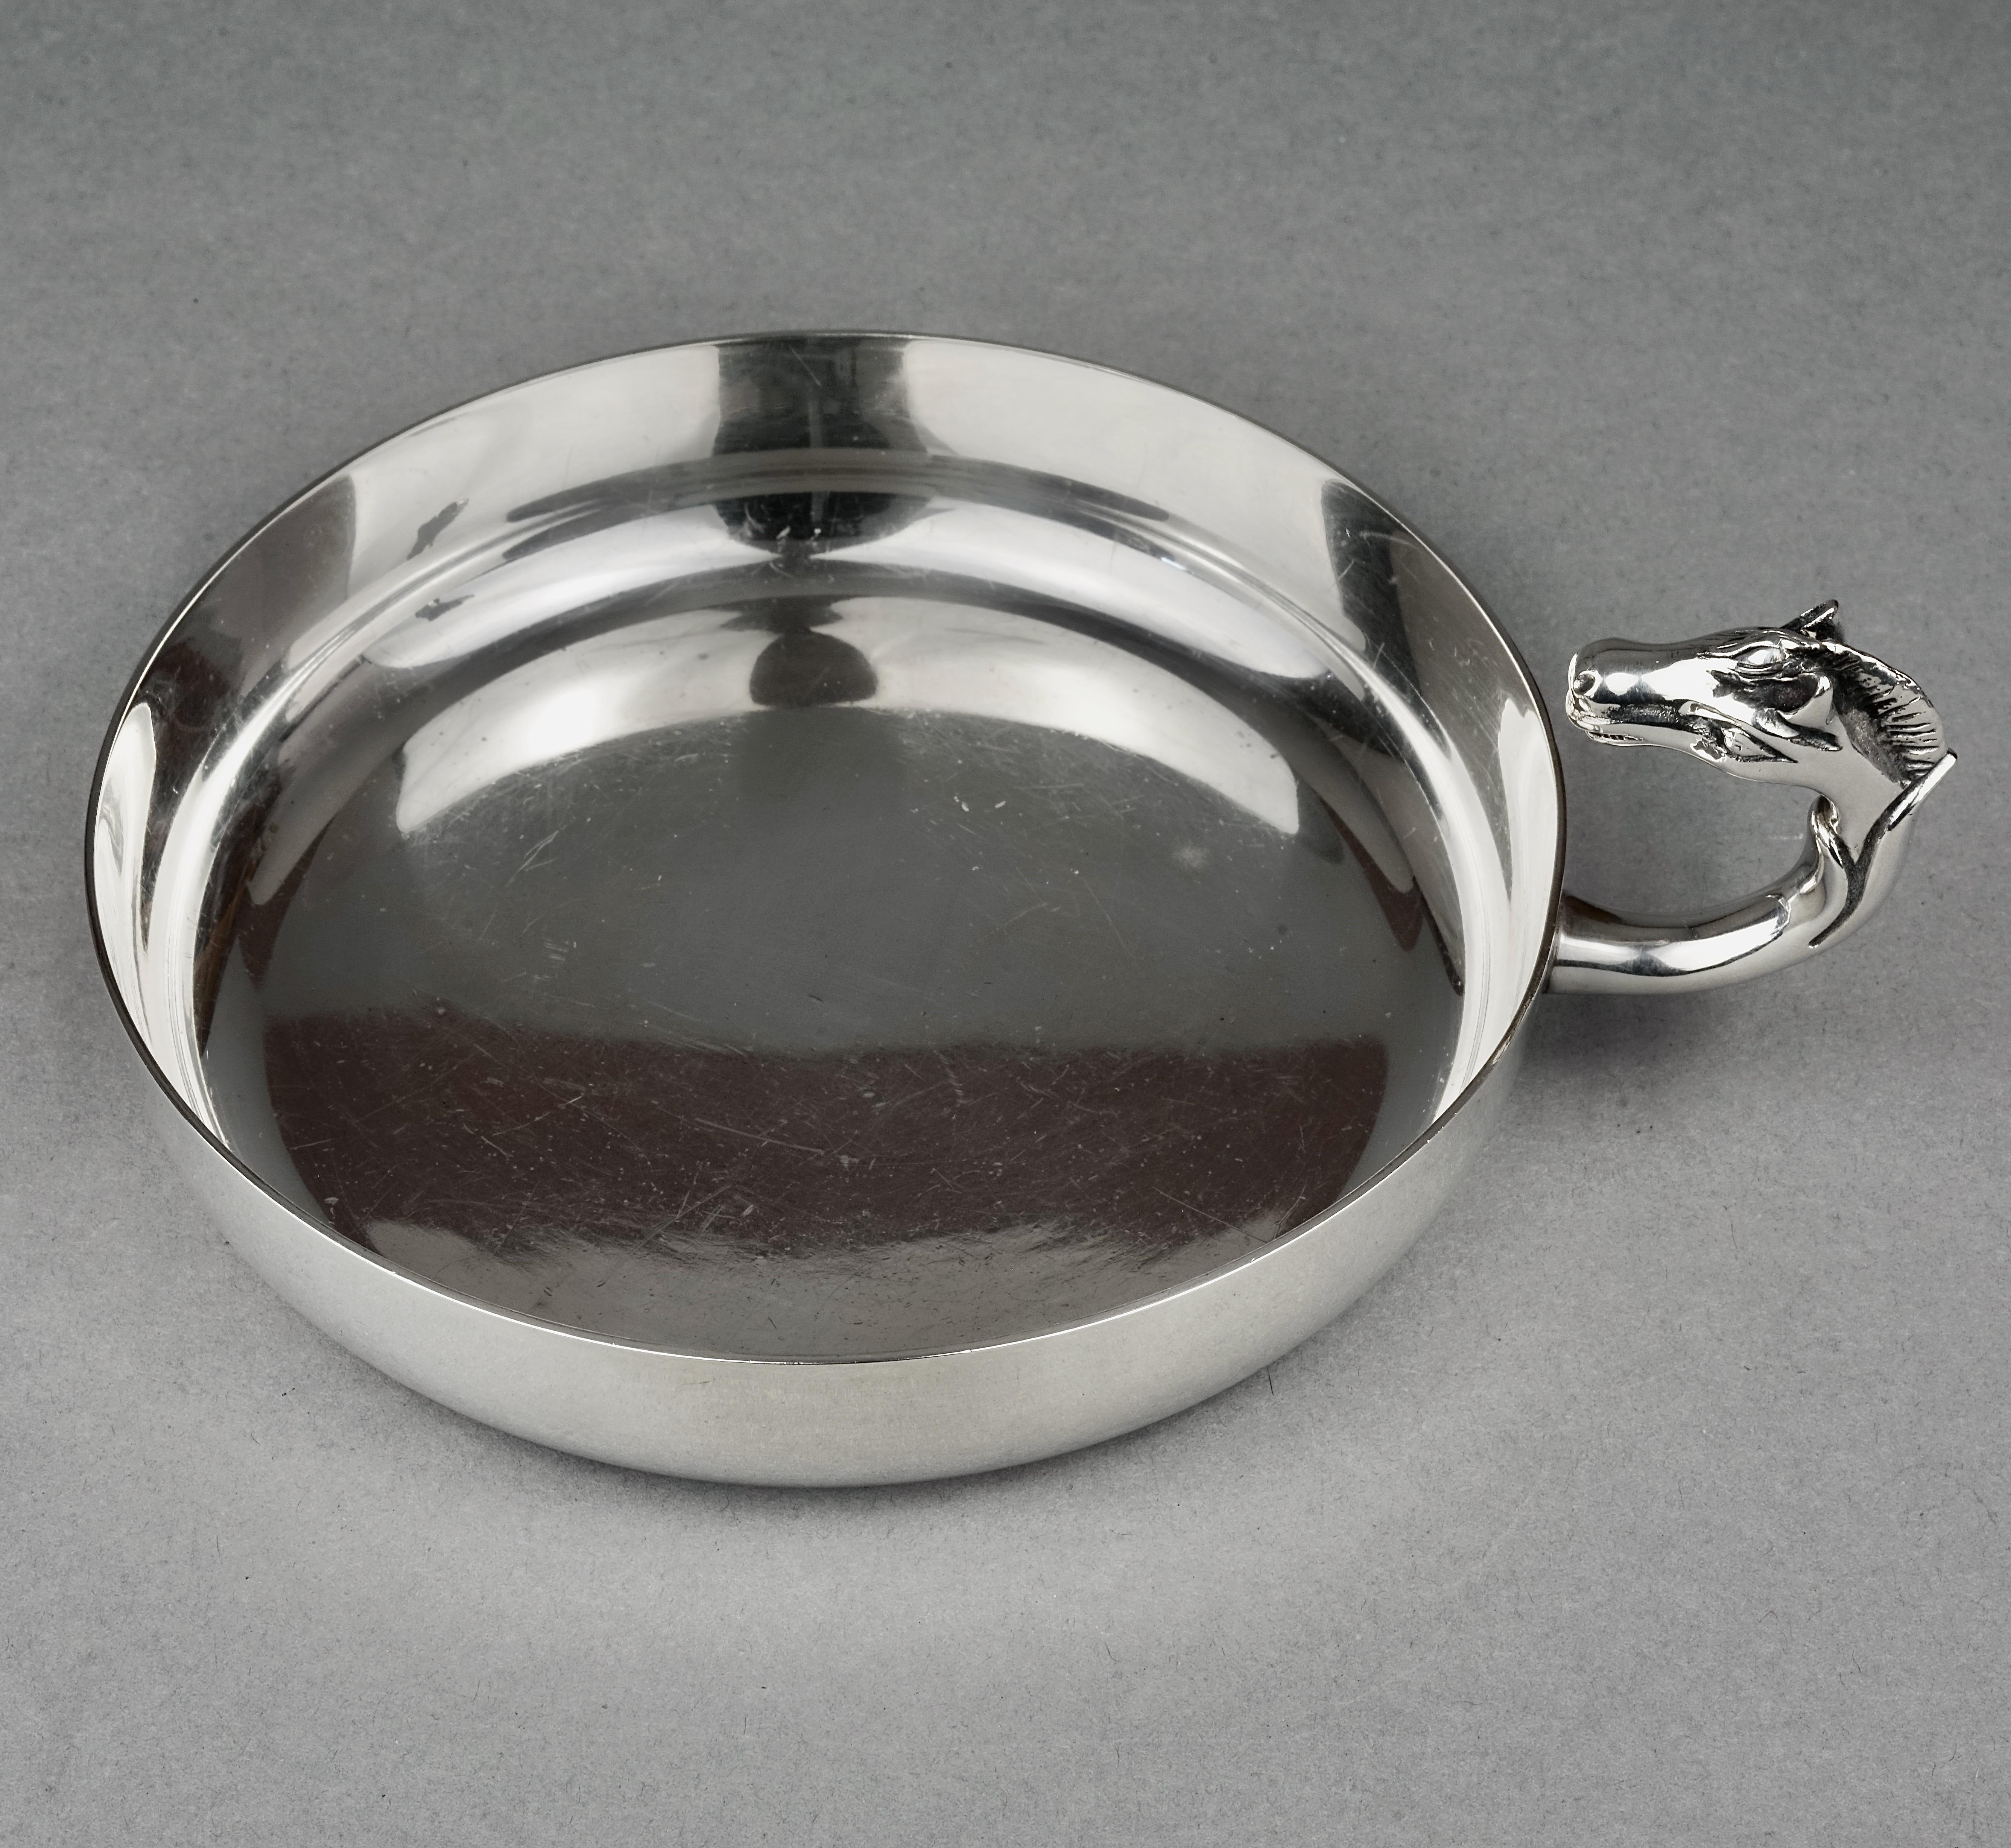 Vintage HERMES Catch All Horse Head Silver Tray Dish by Ravinet d'Enfret

Measurements:
Total Height: 2.44 inches (6.2 cm) with horse head
Diameter: 5.59 inches (14.2)

Features:
- 100% Authentic HERMES.
- Horse head handle.
- Silver tone.
- Signed